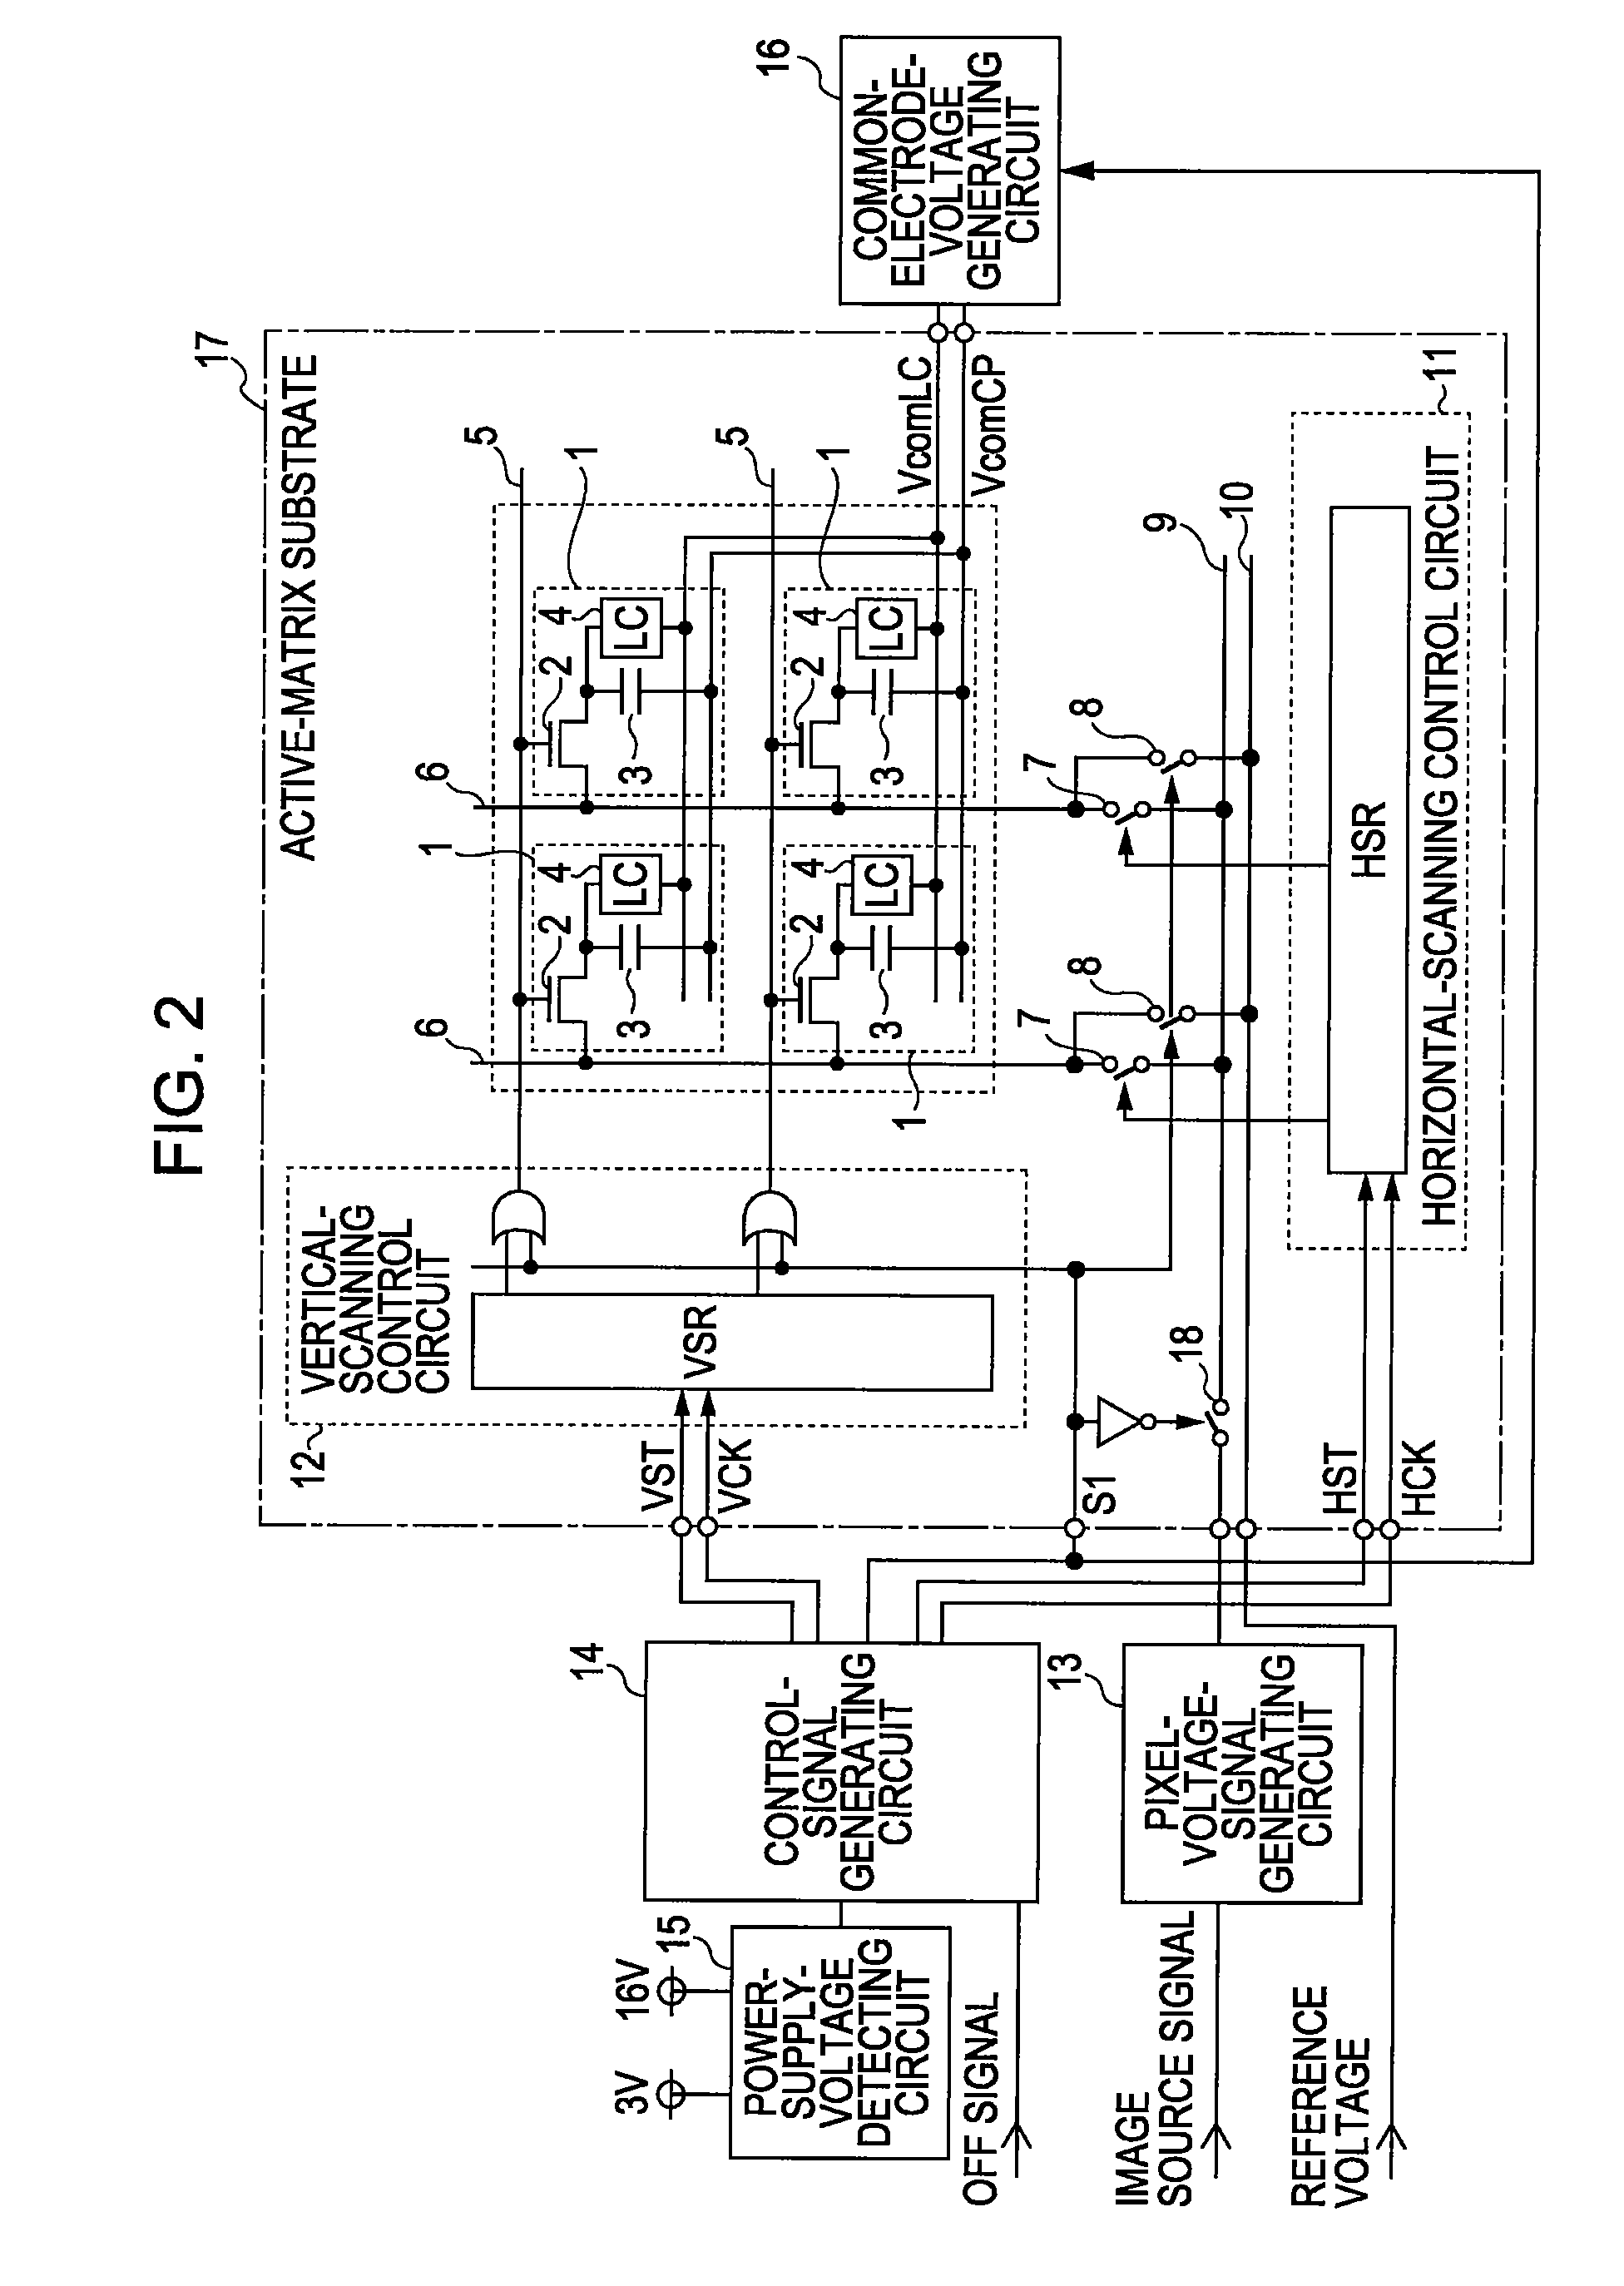 Liquid crystal display apparatus, method of controlling the same, and liquid crystal projector system